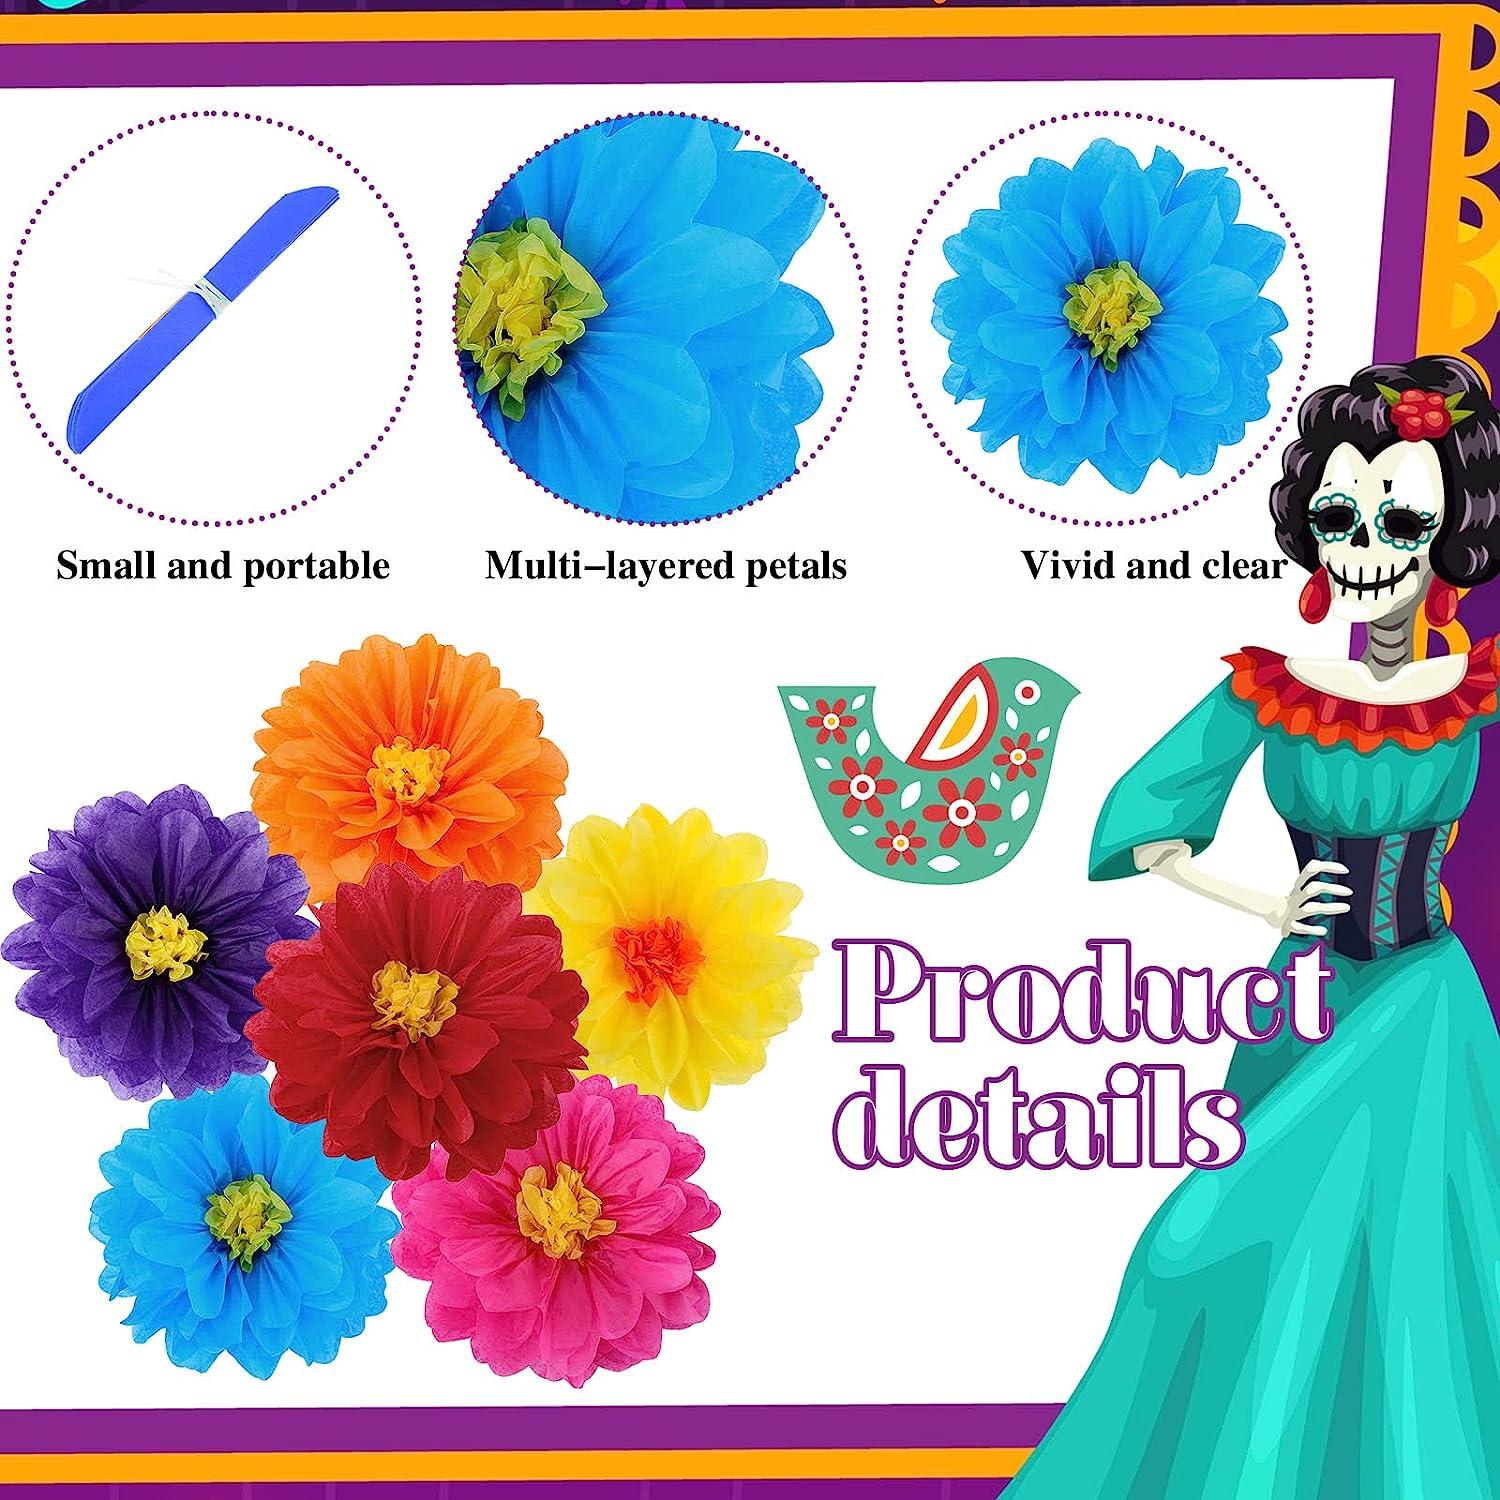 Fiesta Photo Wall Mexican Tissue Paper Flowers Decorations Party